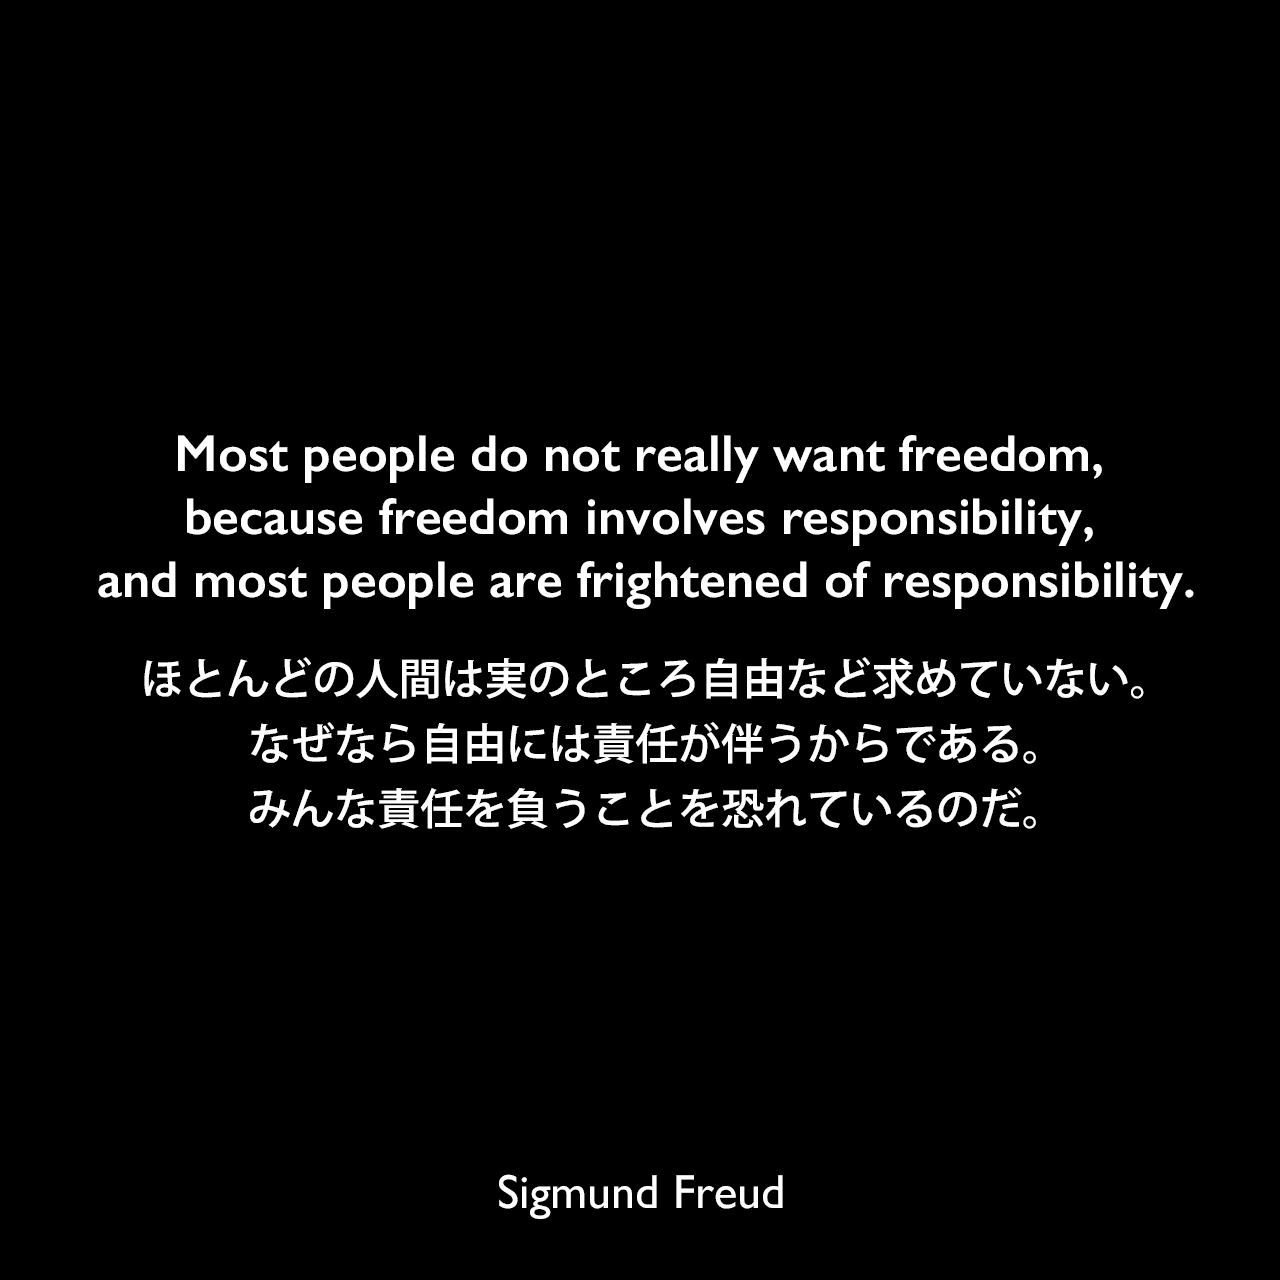 Most people do not really want freedom, because freedom involves responsibility, and most people are frightened of responsibility.ほとんどの人間は実のところ自由など求めていない。なぜなら自由には責任が伴うからである。みんな責任を負うことを恐れているのだ。Sigmund Freud